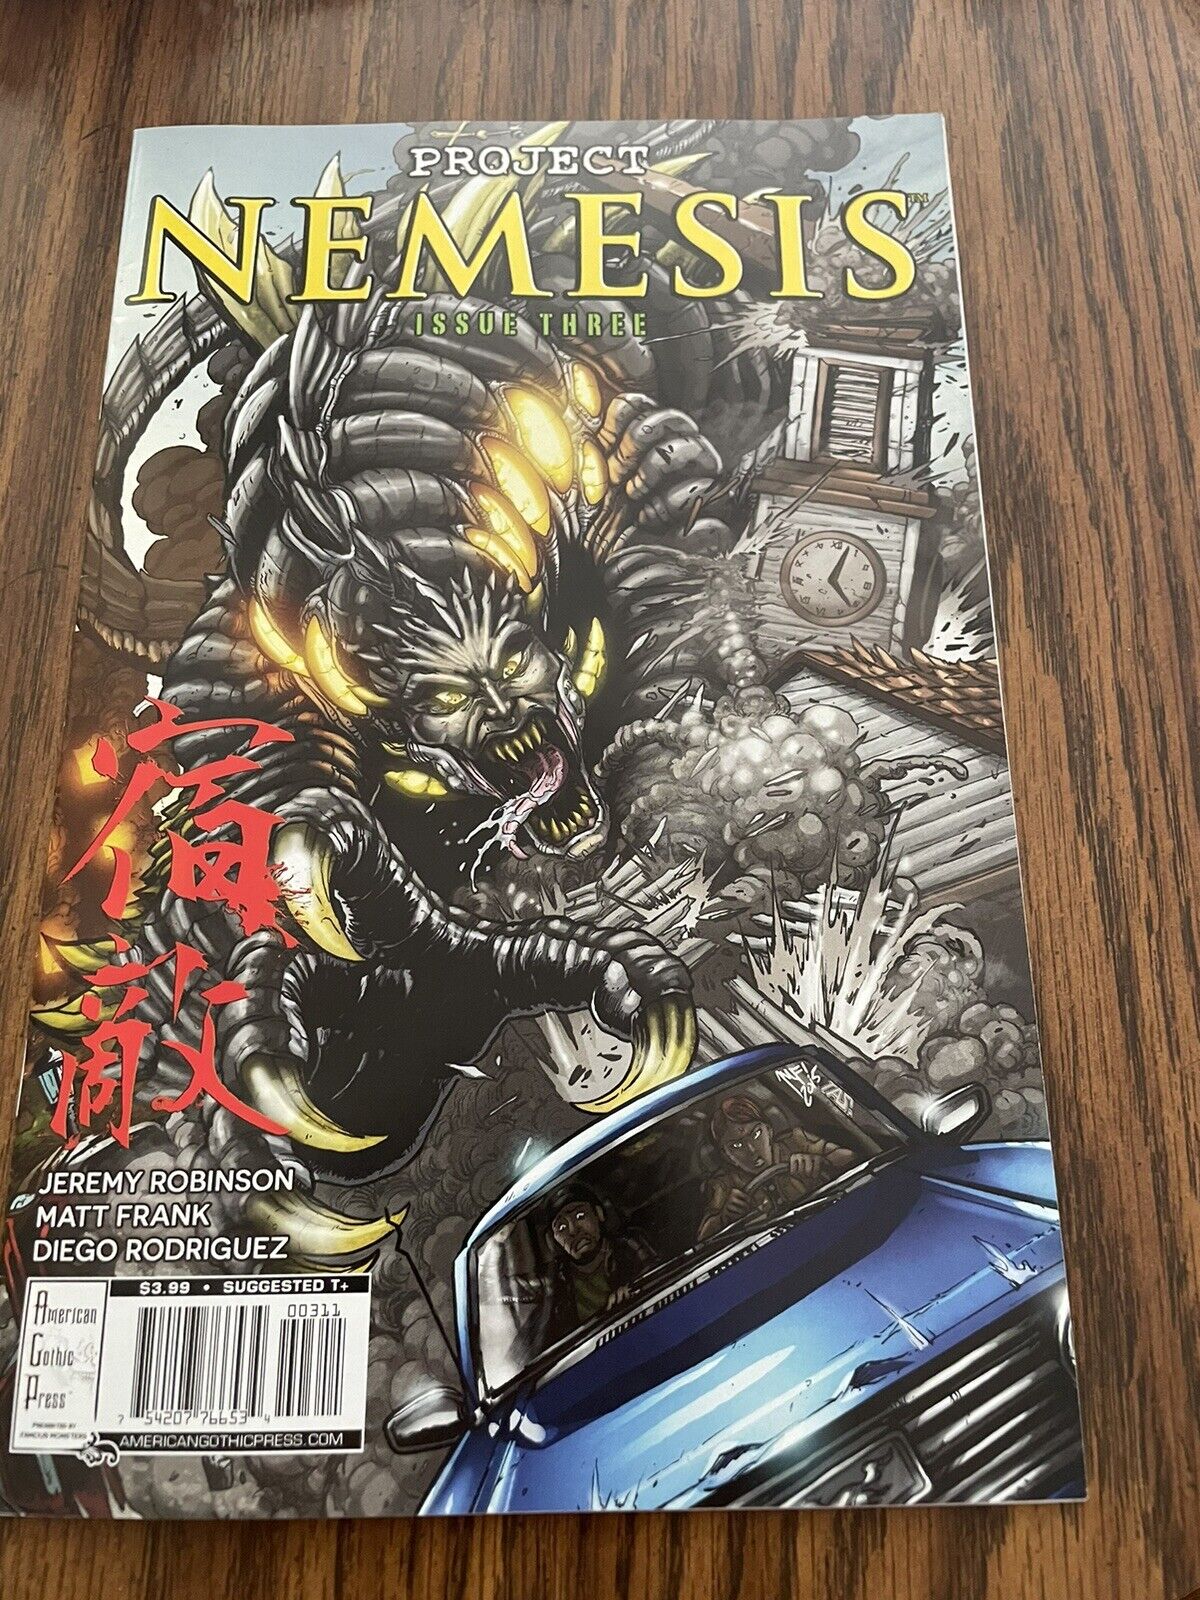 Project Nemesis Issue 3 American Gothic Press 2015